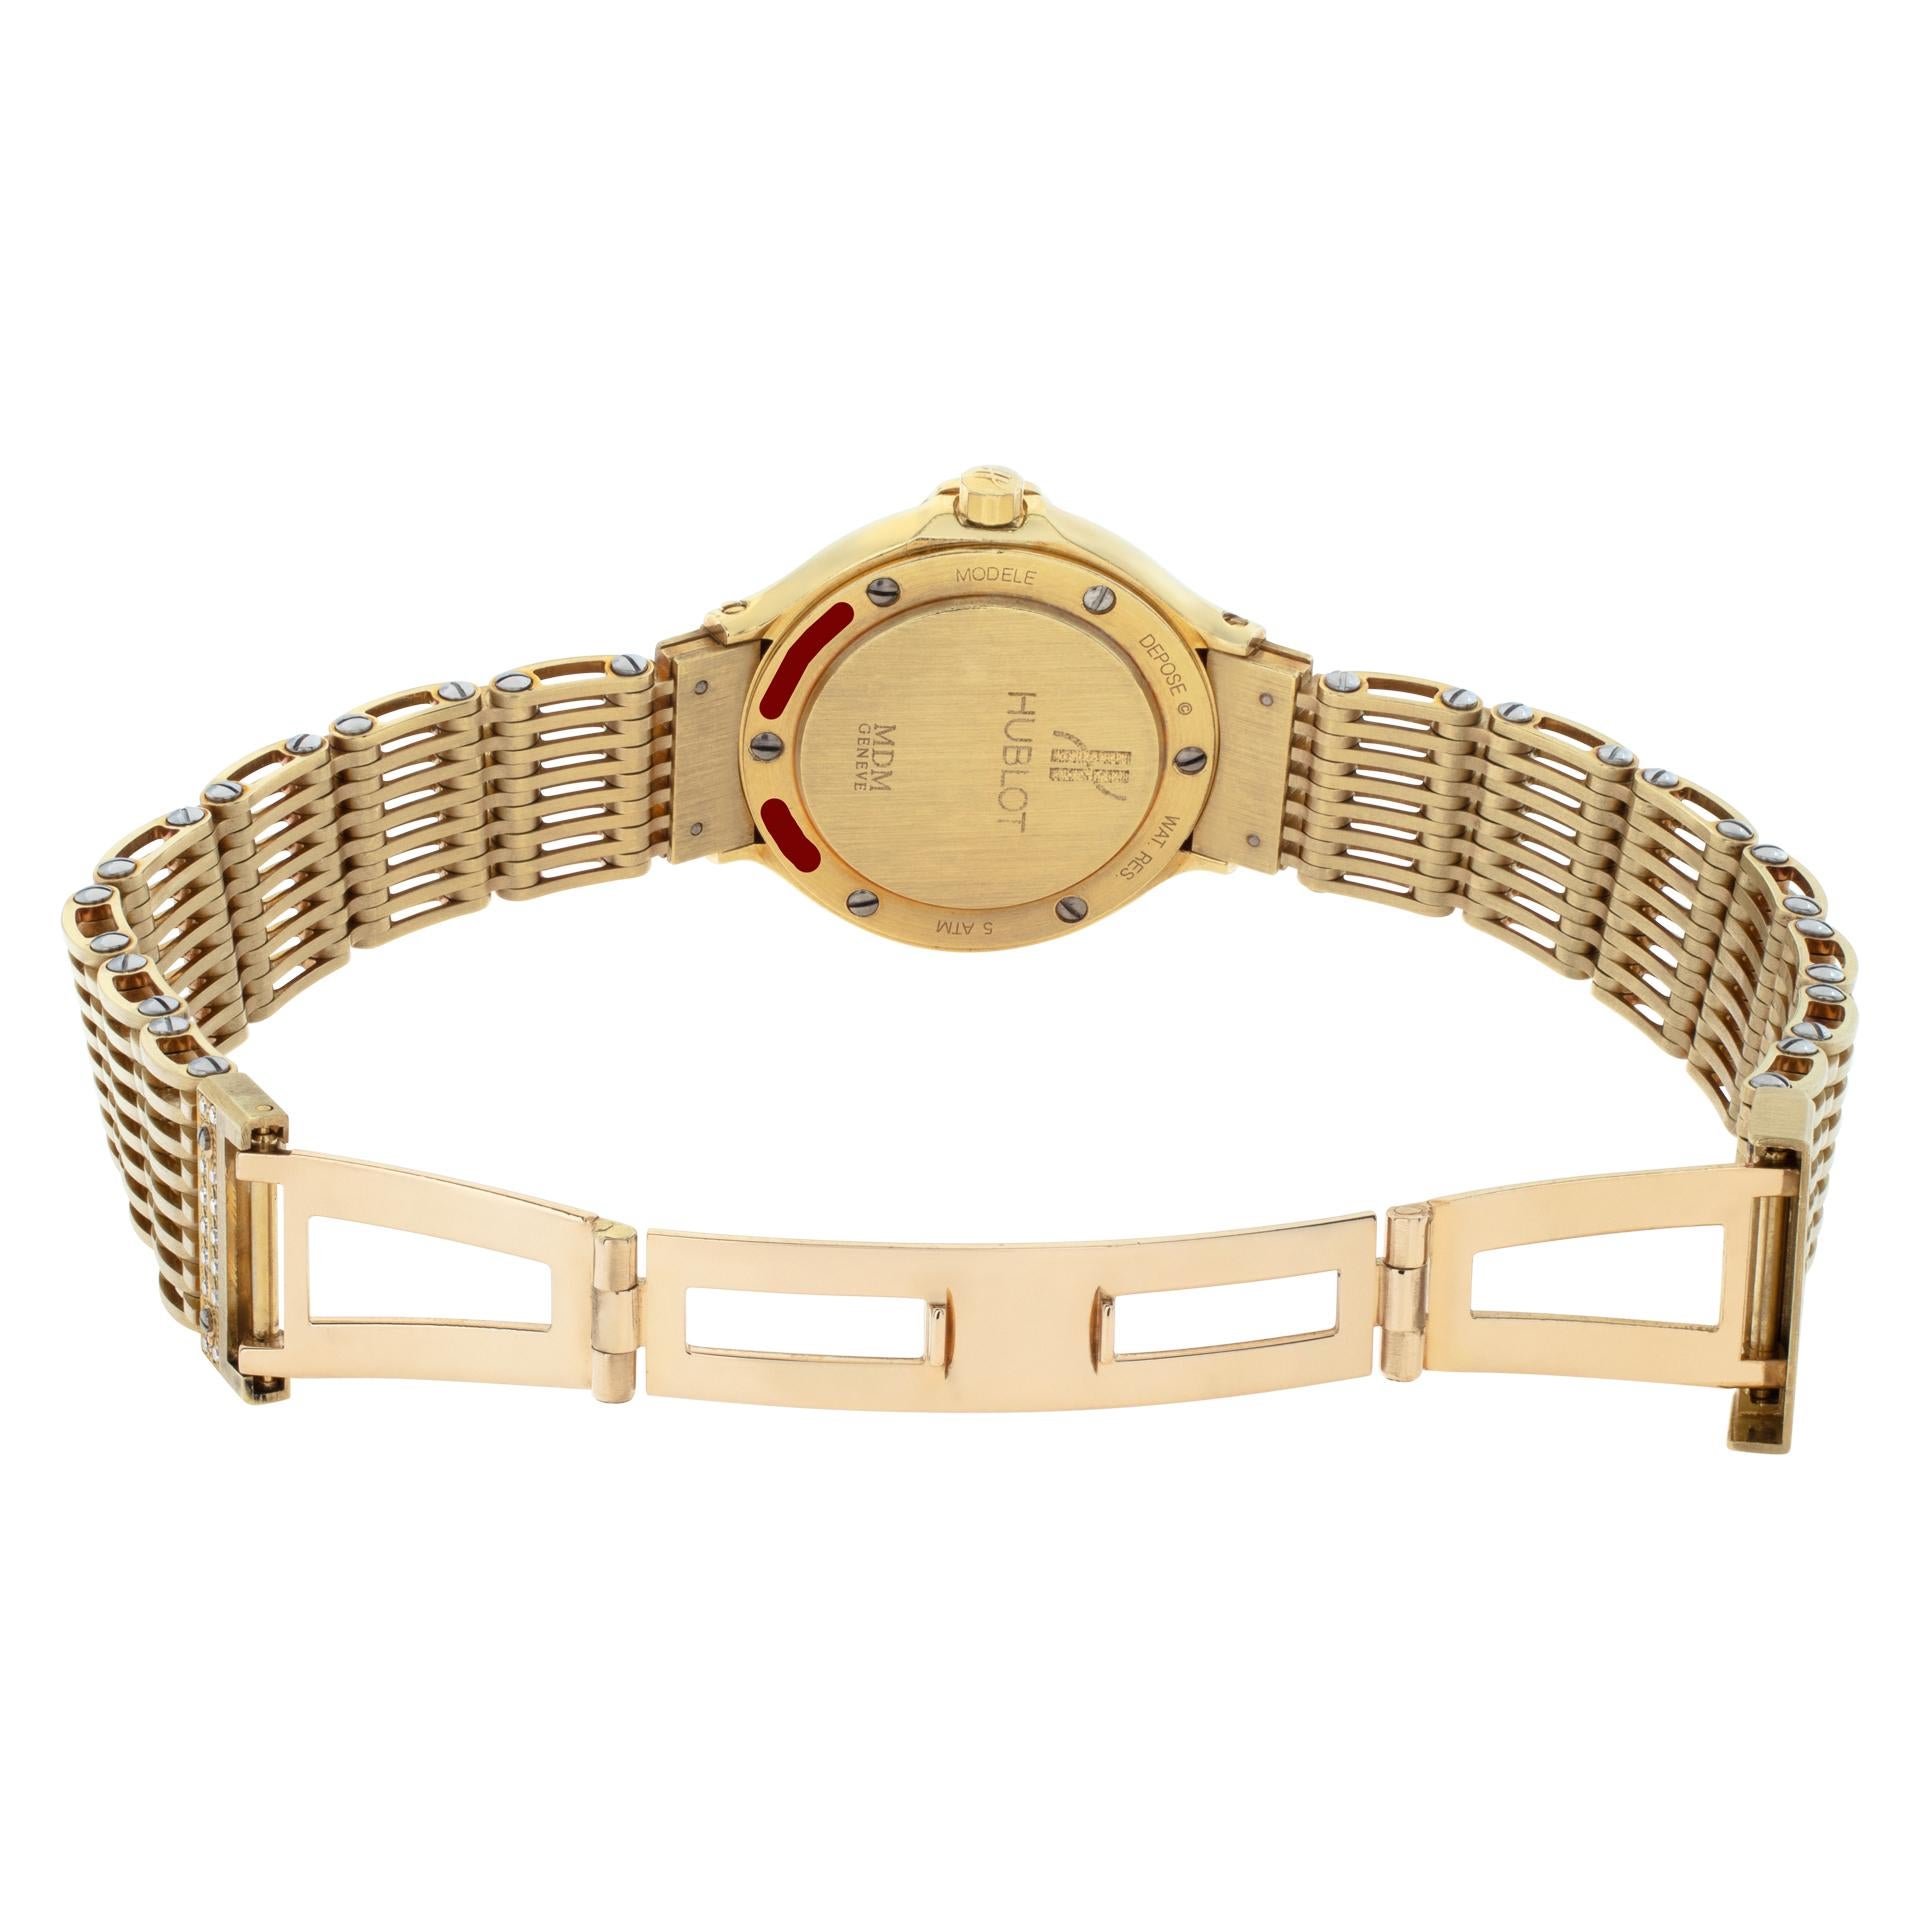 Women's Hublot M D M 1391.3 054 inYellow Gold with a White dial 28mm Quartz watch For Sale